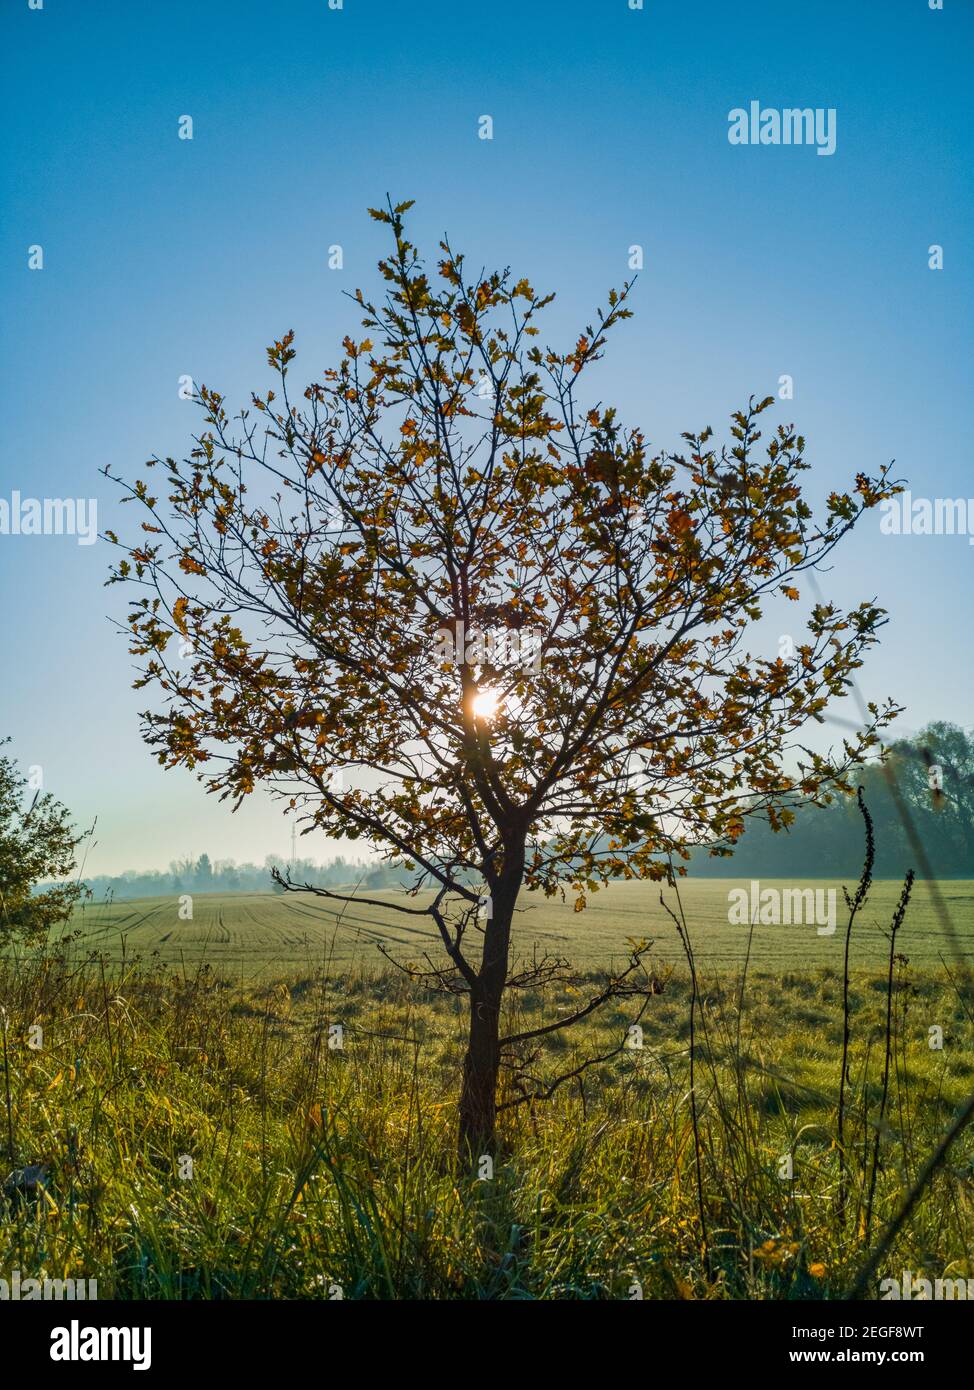 Small tree with green and yellow fields around and shining sun behind Stock Photo